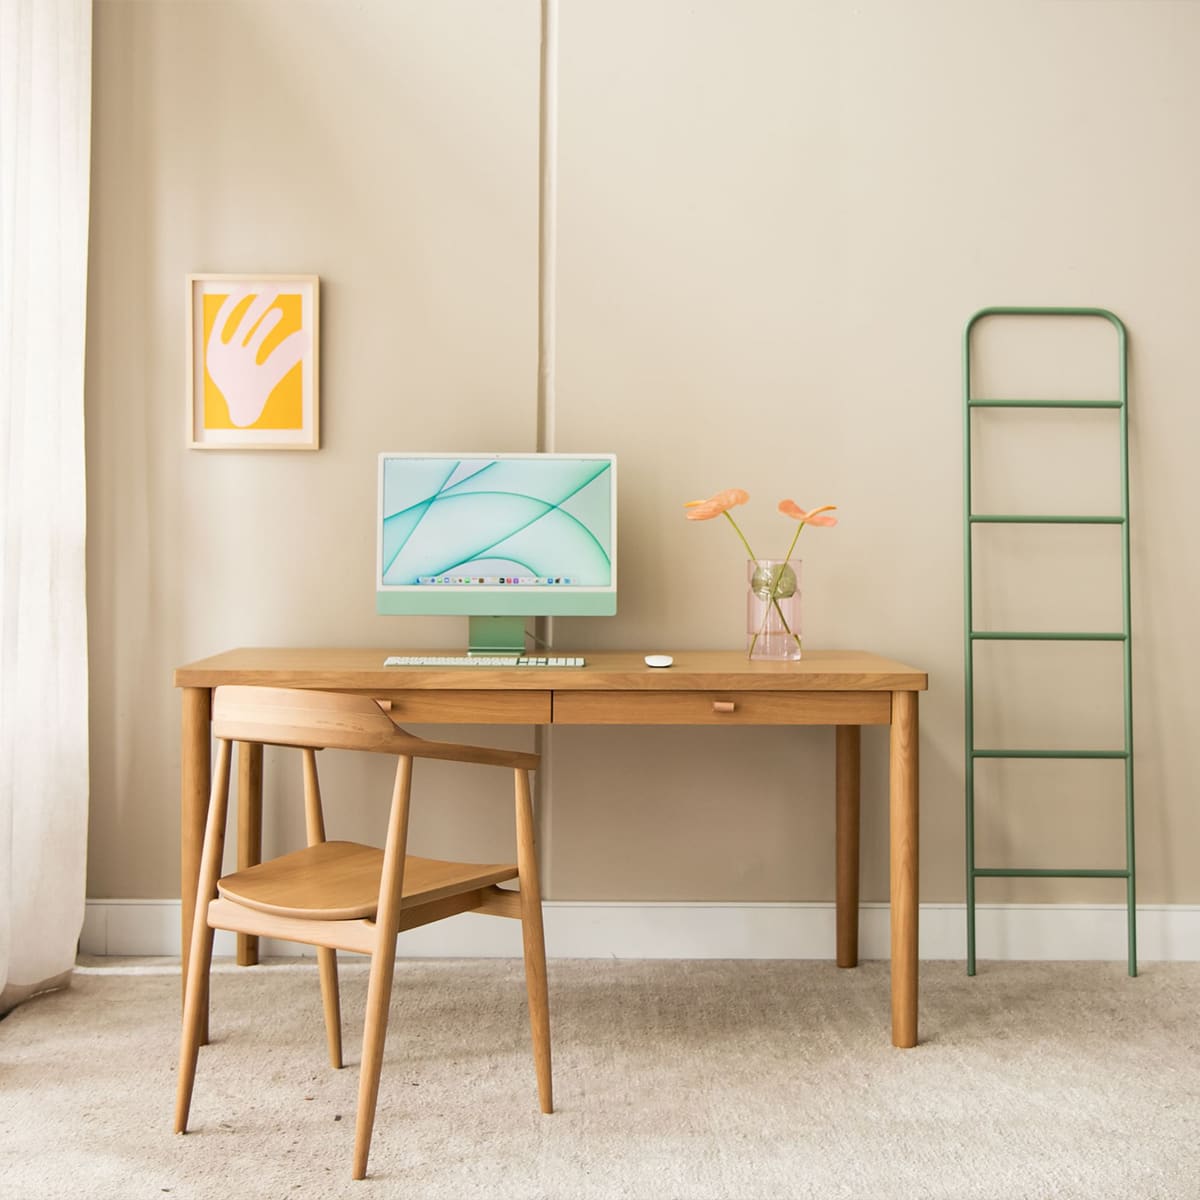 Scale Storage Ladder - Juniper - Styled Image by RJ Living